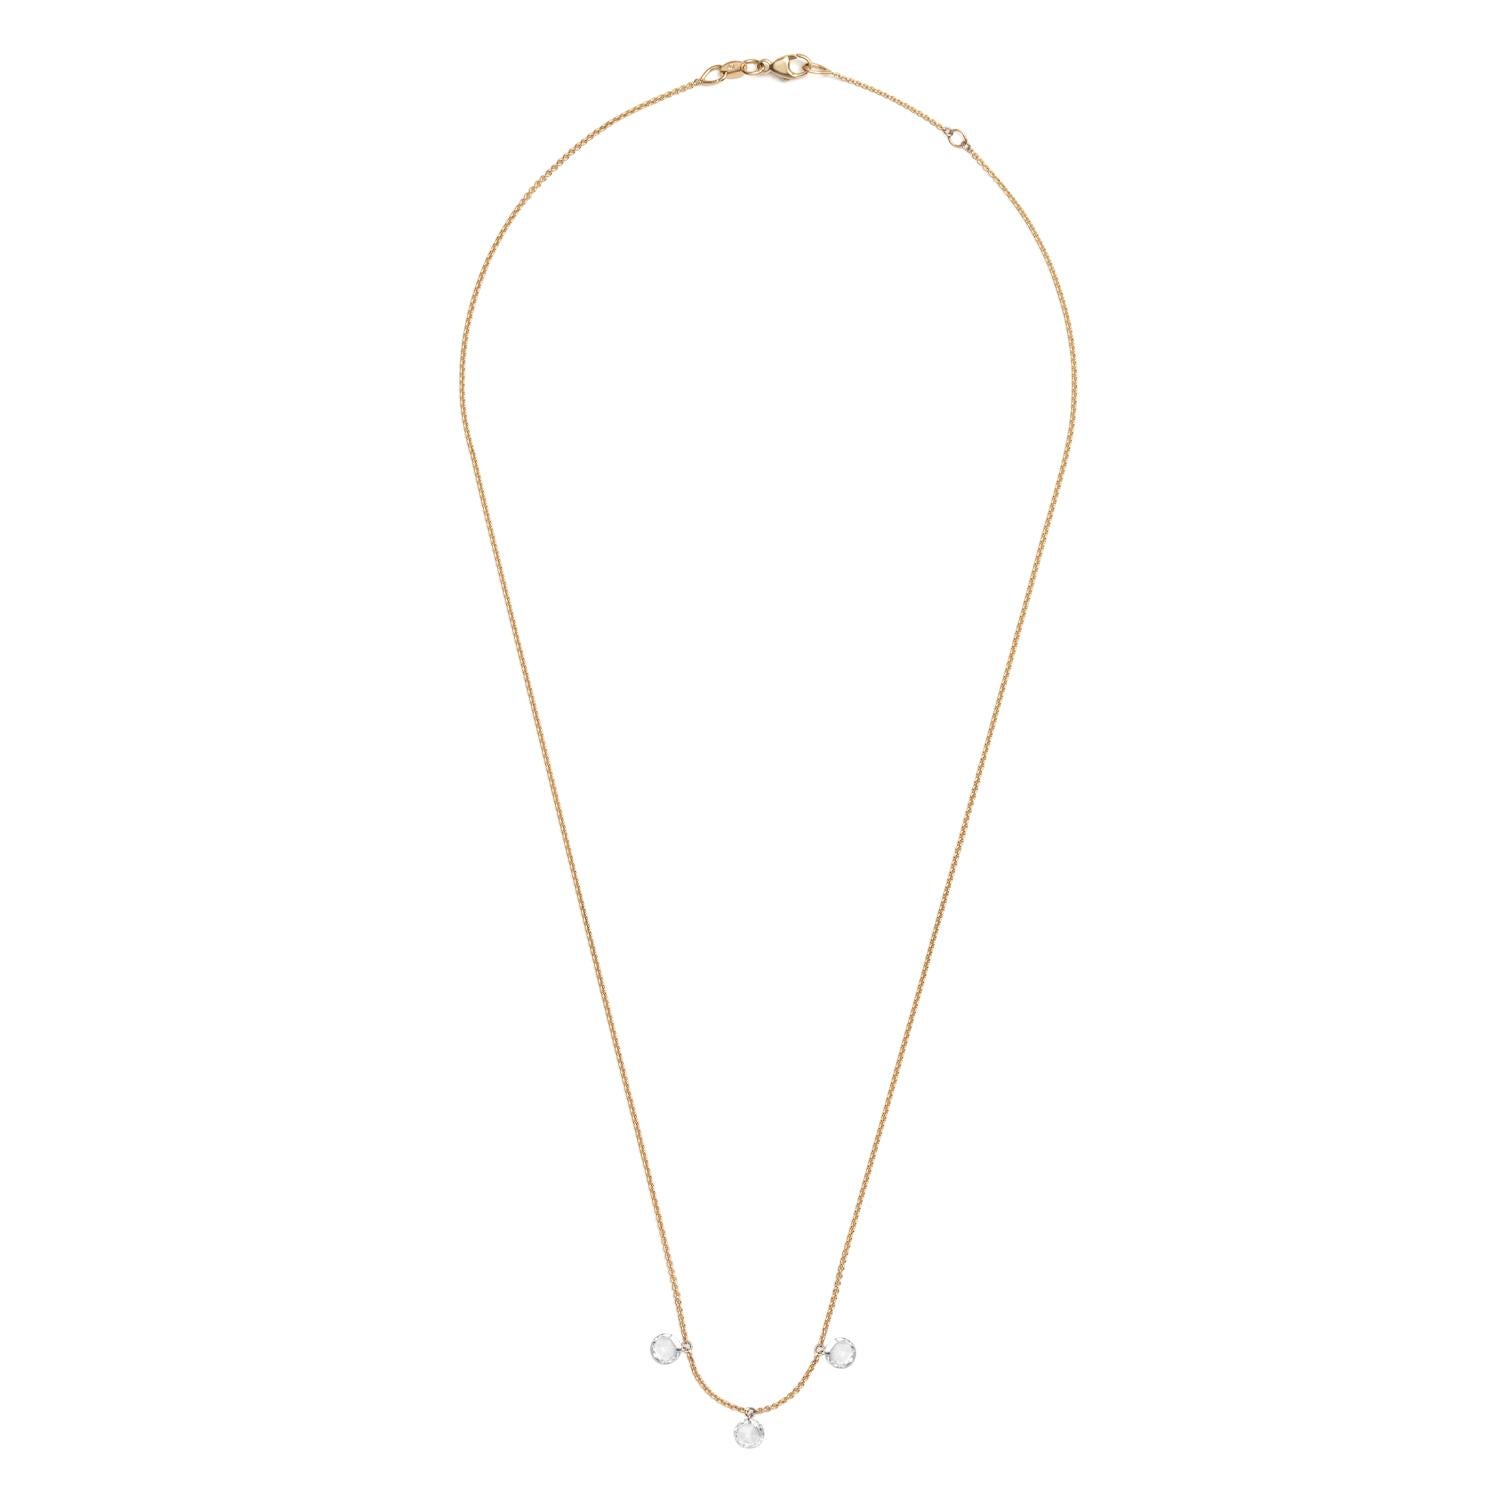 Three pierced rose cut diamonds float on a 14k yellow gold chain resulting in this perfect everyday necklace. Works great to layer with other necklaces or on its own. 

Diamond carat weight: 0.6 - 0.65 carats
Diamond quality: F-color, VS+